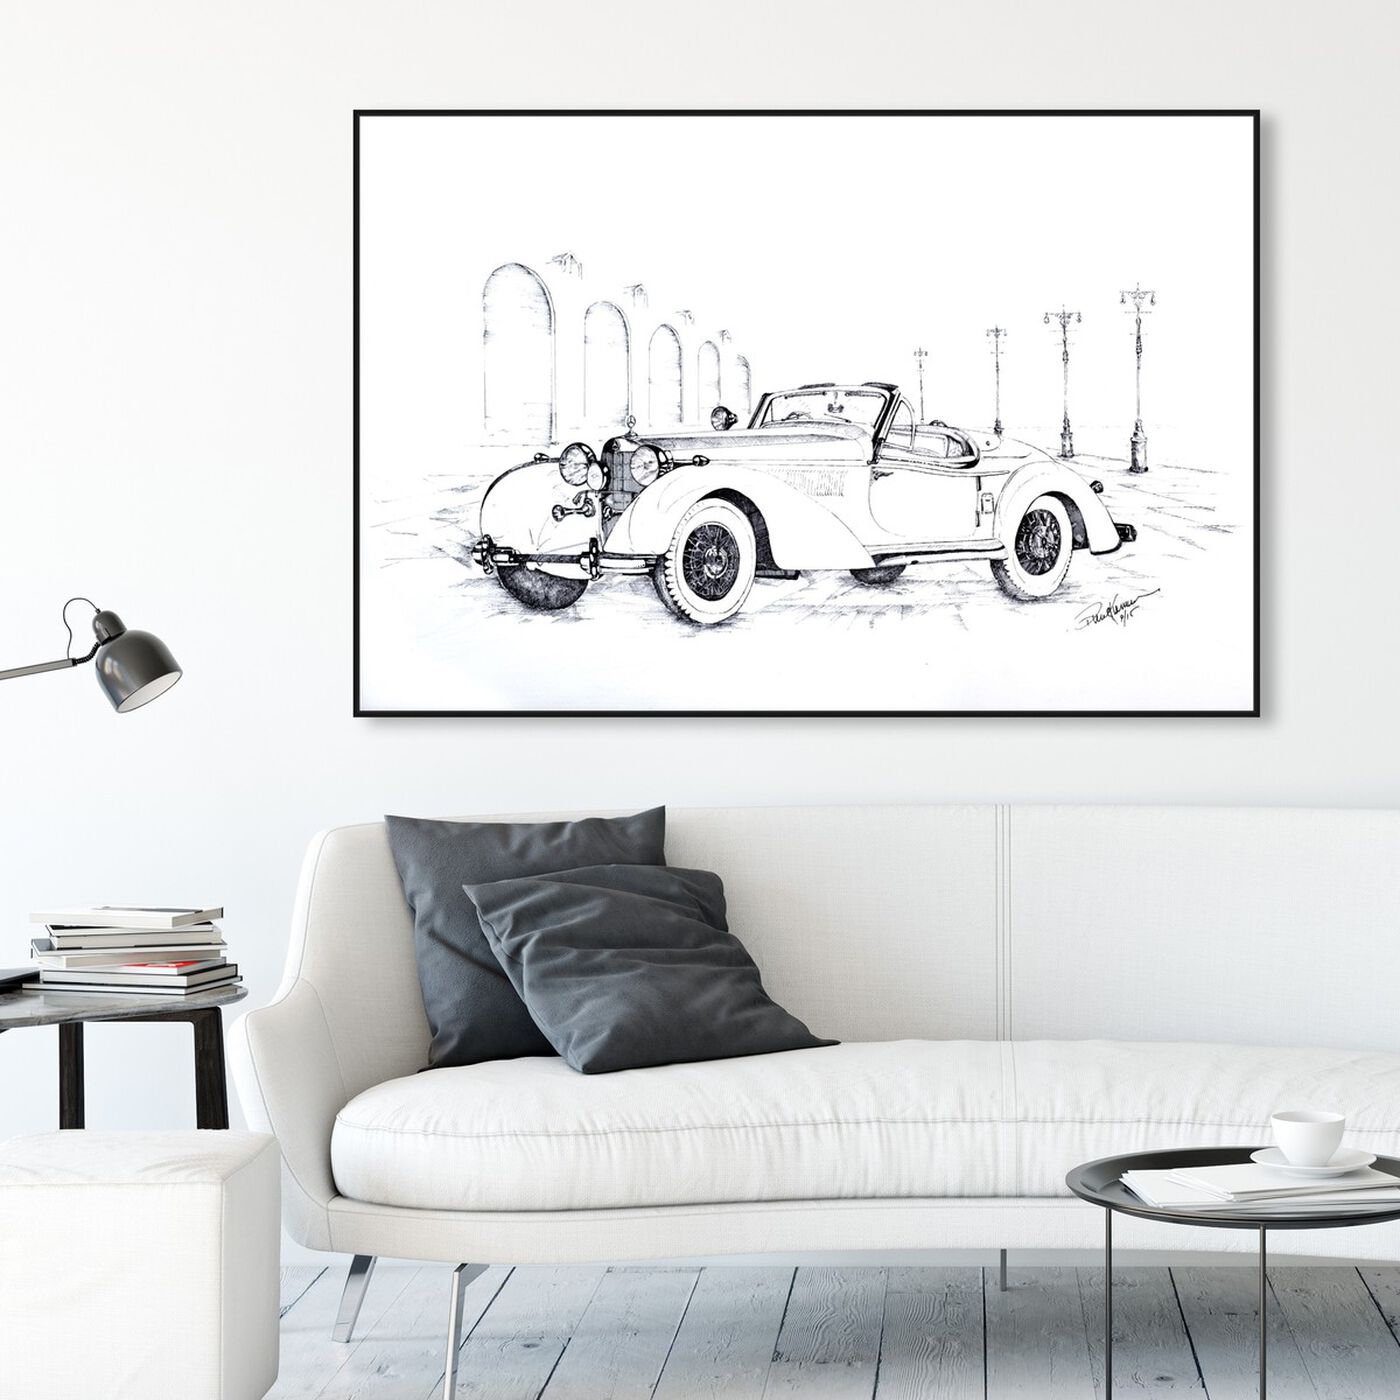 Hanging view of Paul Kaminer - 1936 Mercedes Roadster featuring transportation and automobiles art.